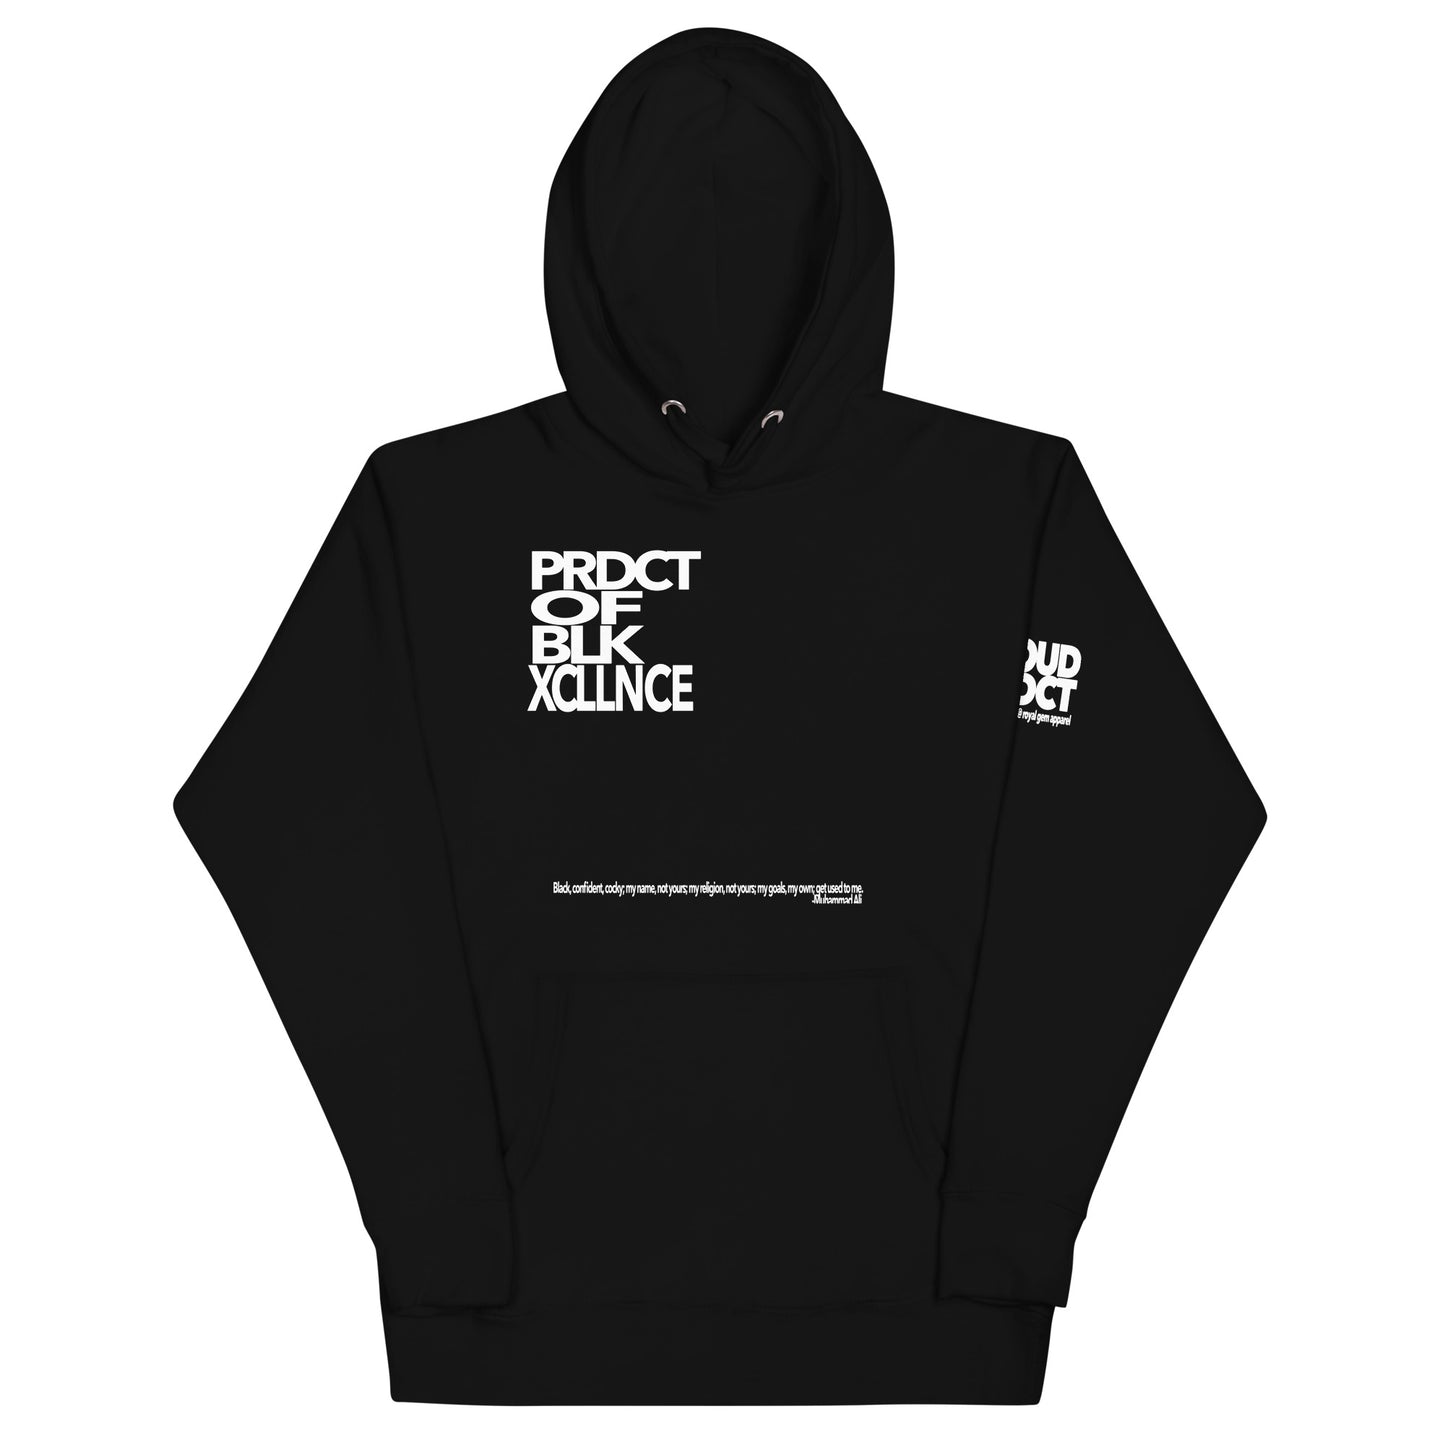 "The Product of Black Excellence" Hoodie